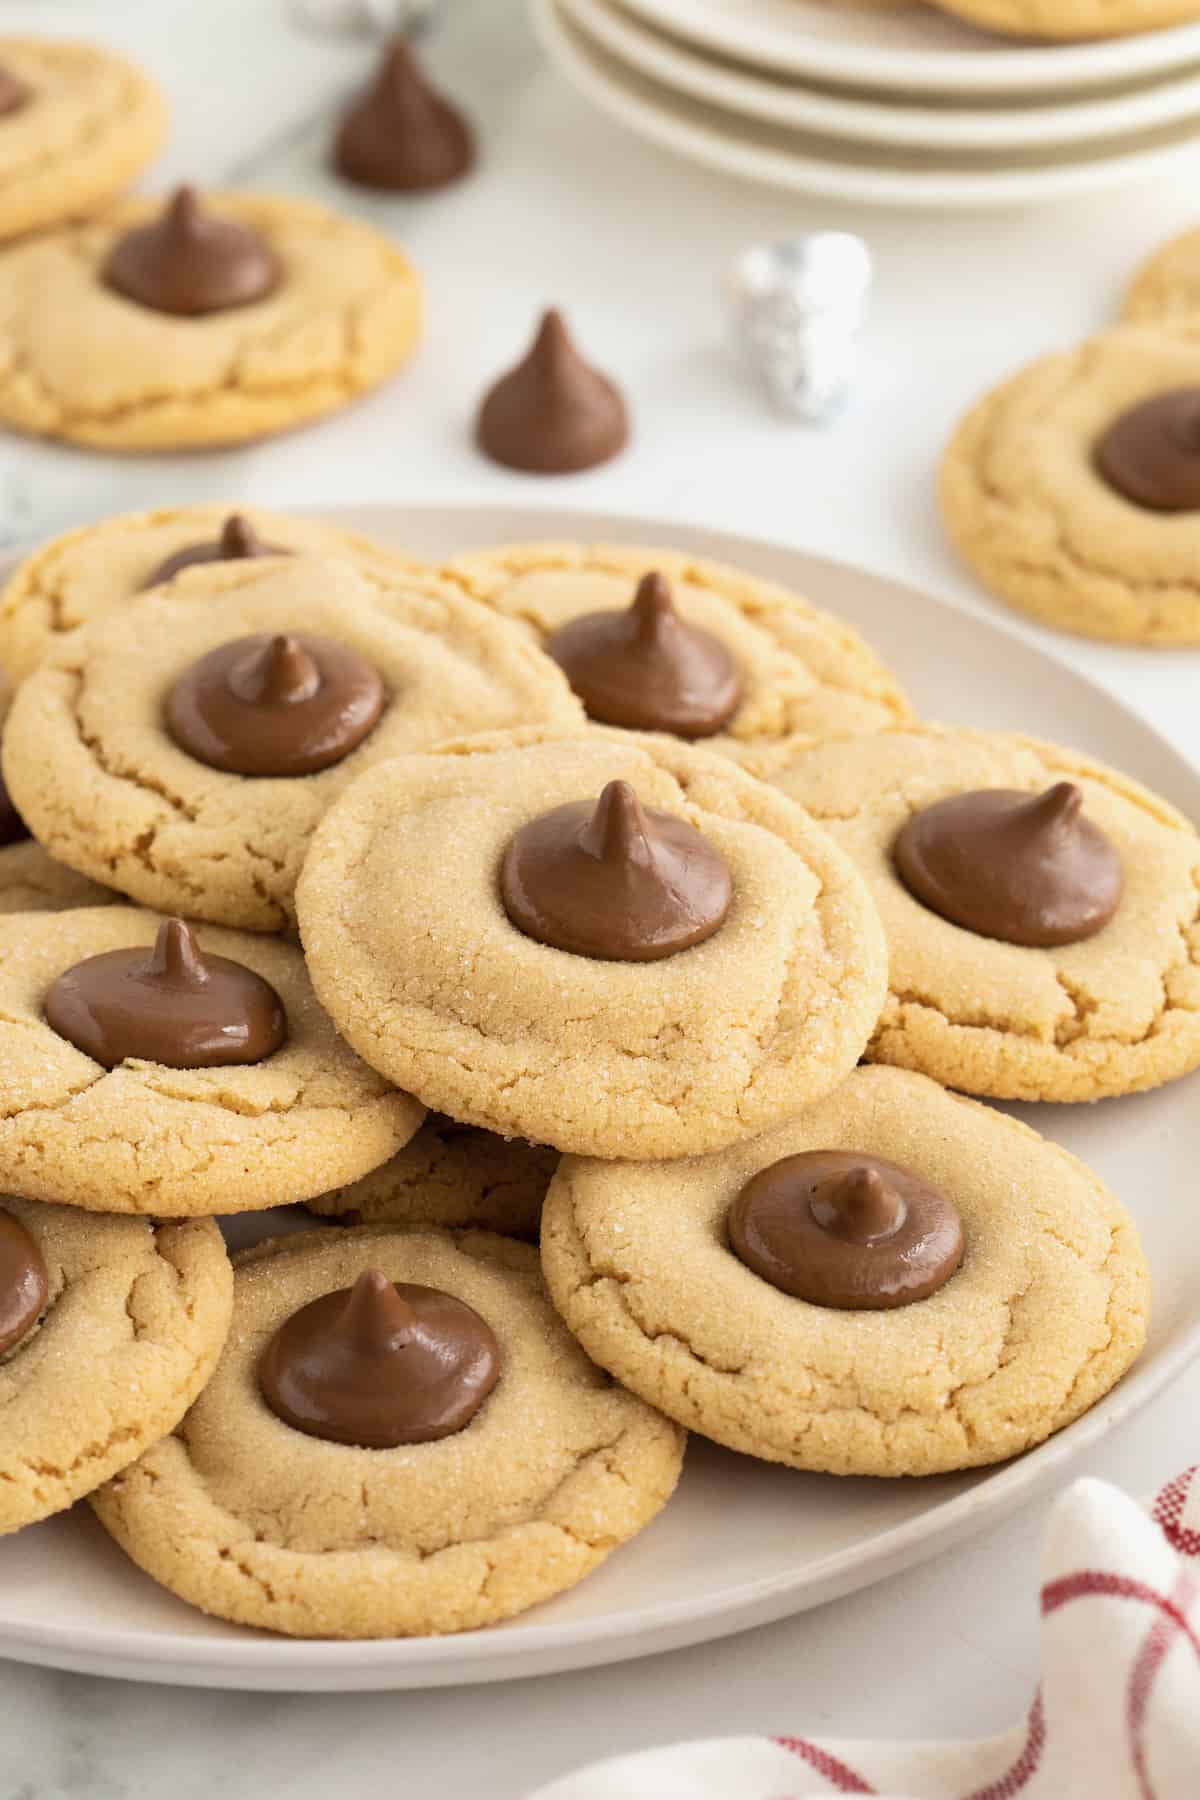 A pile of peanut butter holiday cookies with a Hershey's kiss in the center on a round white serving plate.